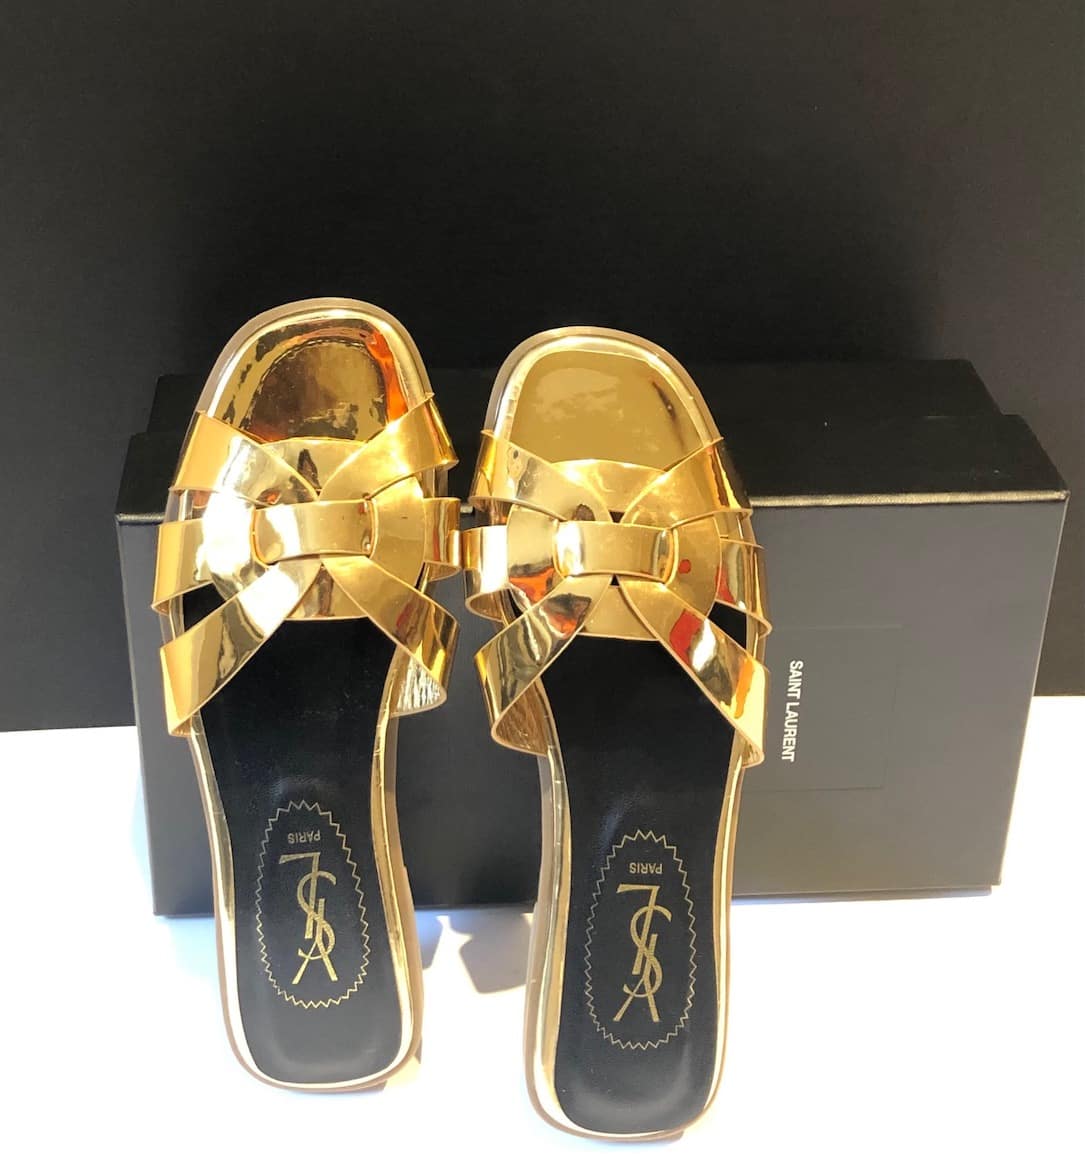 Immersion mill Every week YVES SAINT-LAURENT Tribute Flat Metallic Gold Sandals Shoes Circa 2000 -  Chelsea Vintage Couture